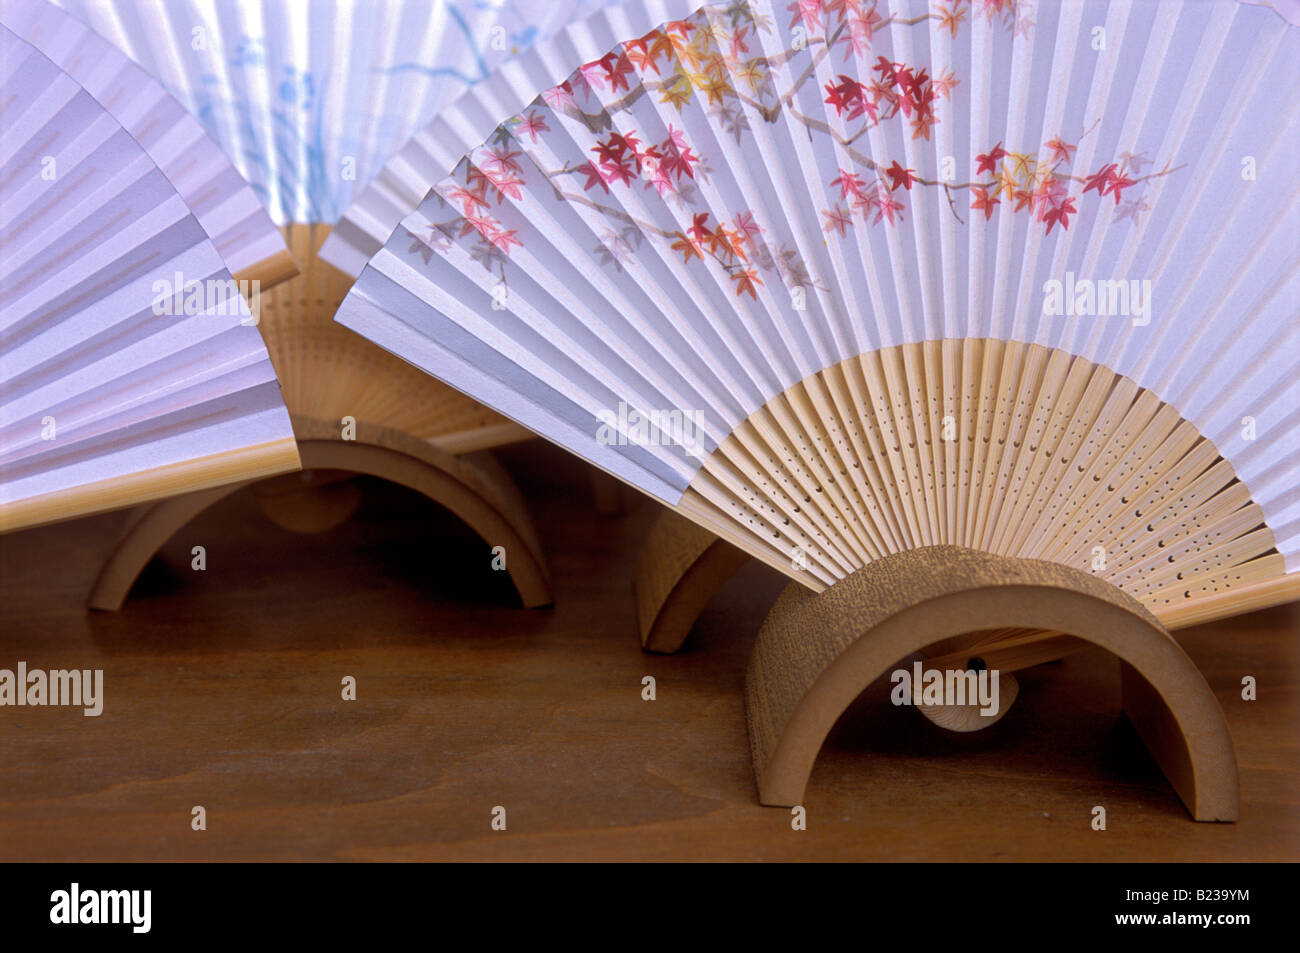 Display of artistically painted paper and bamboo folding fans in bamboo rests for the autumn season Stock Photo